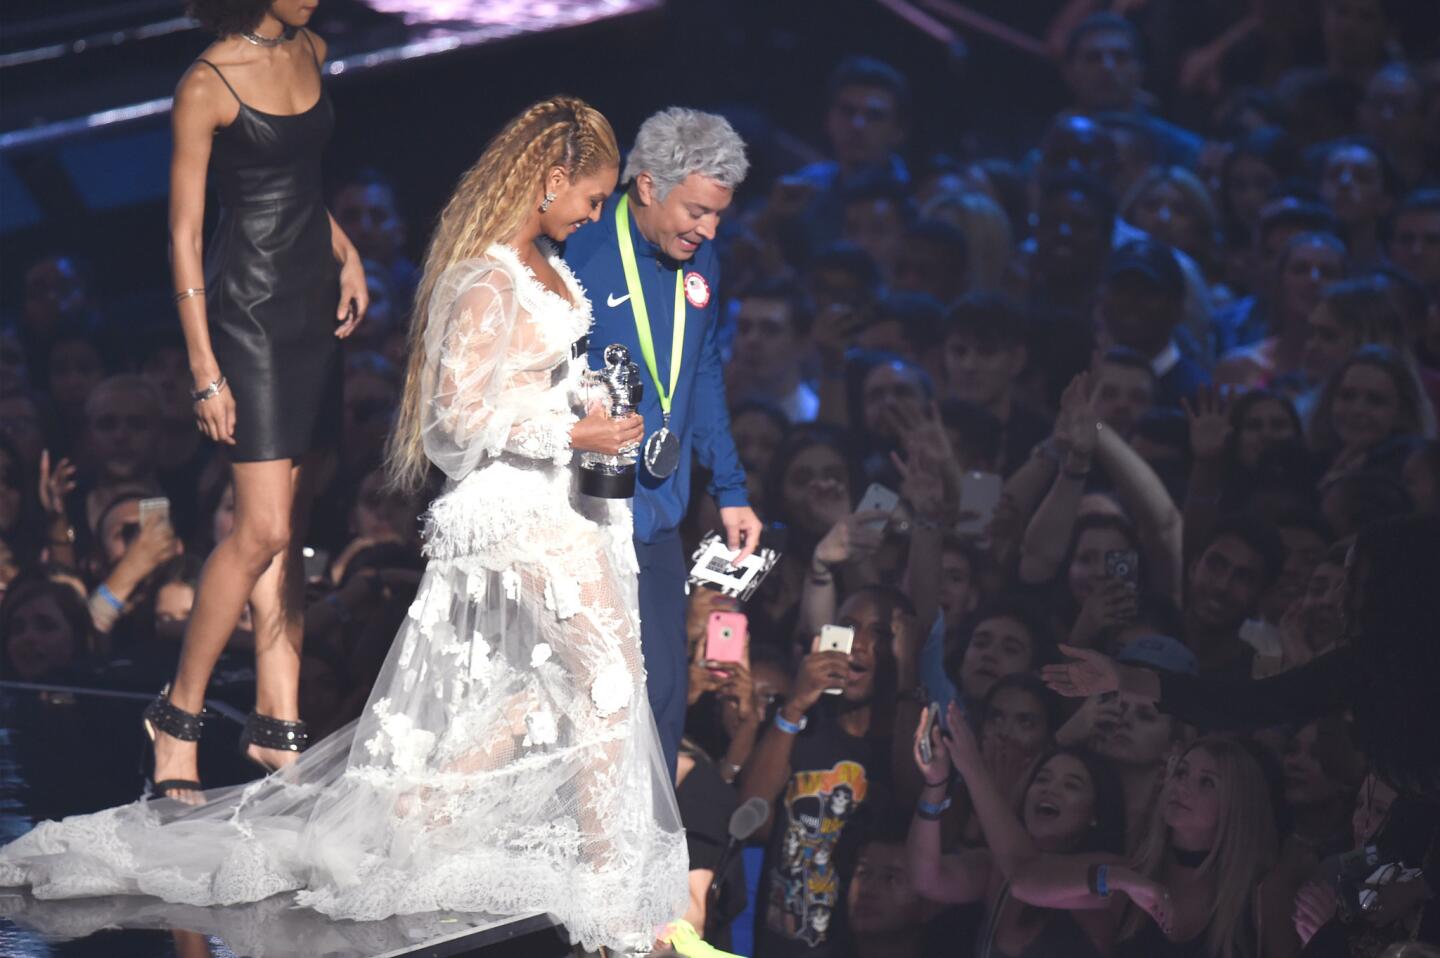 Jimmy Fallon, as Olympian swimmer Ryan Lochte, helps Beyoncé walk in her dress after presenting her with video of the year for "Formation" onstage during the 2016 MTV Video Music Awards at Madison Square Garden in New York.